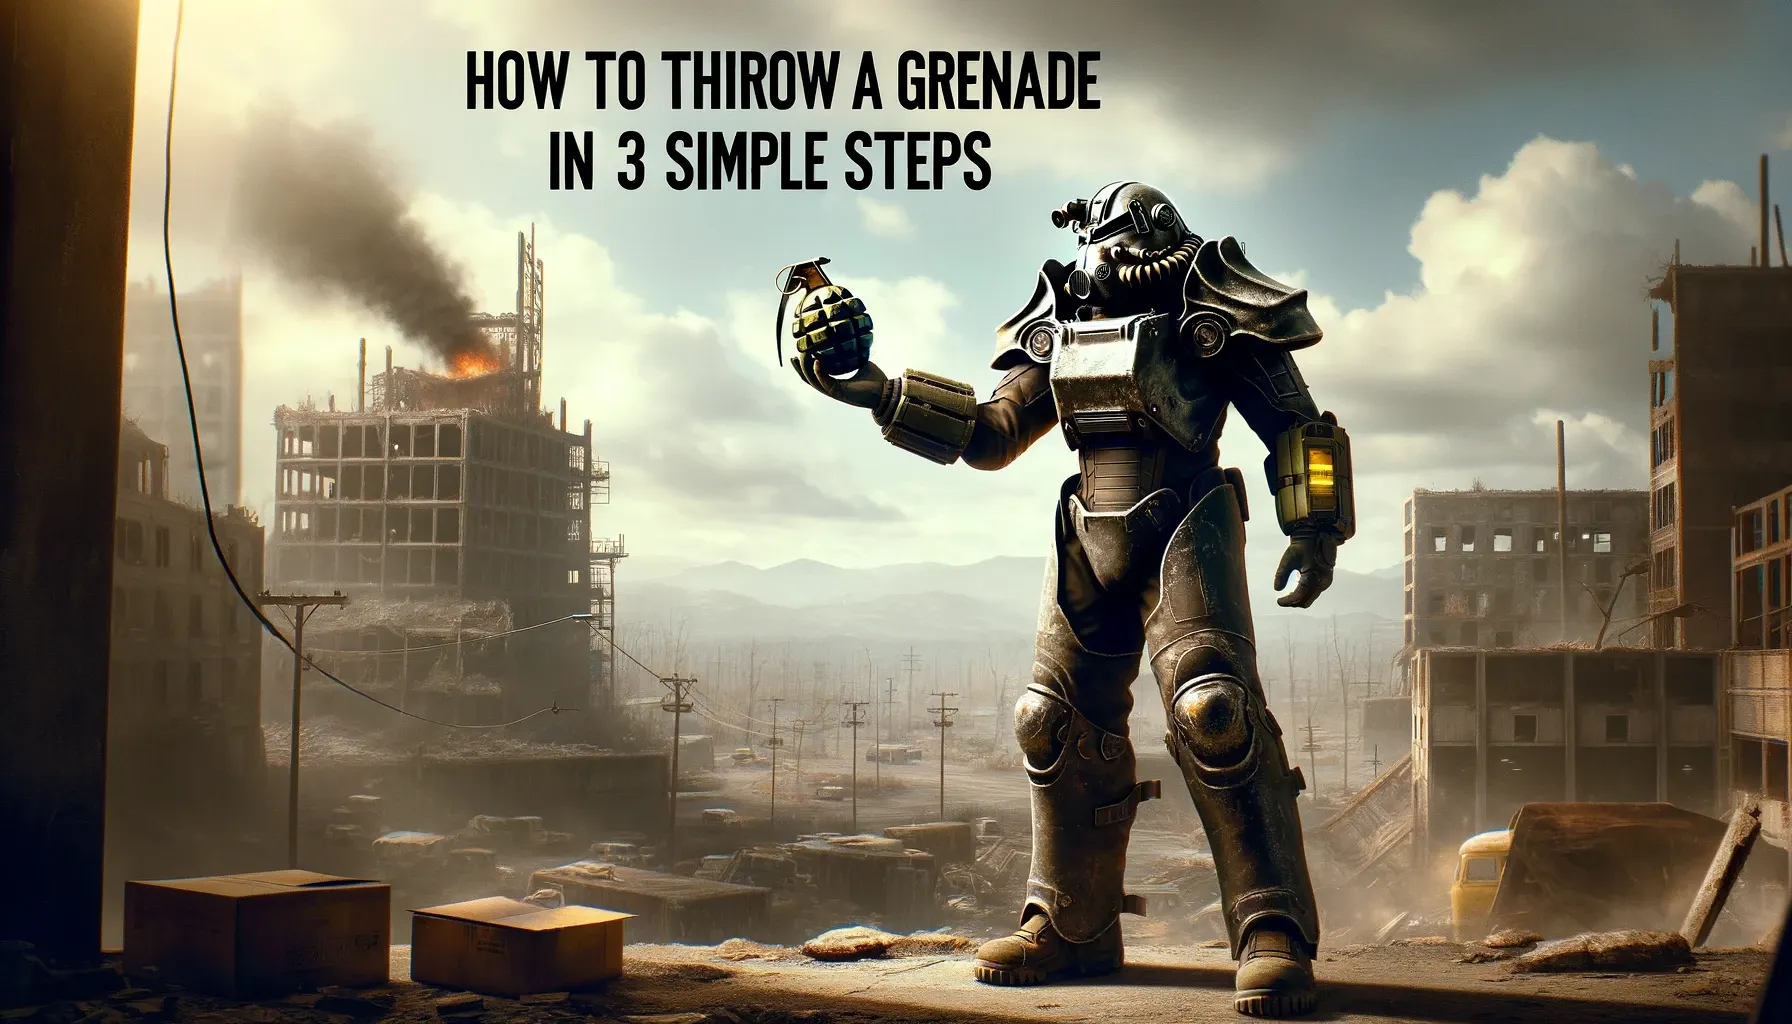 How to Throw a Grenade in Fallout 4: 3 Simple Steps